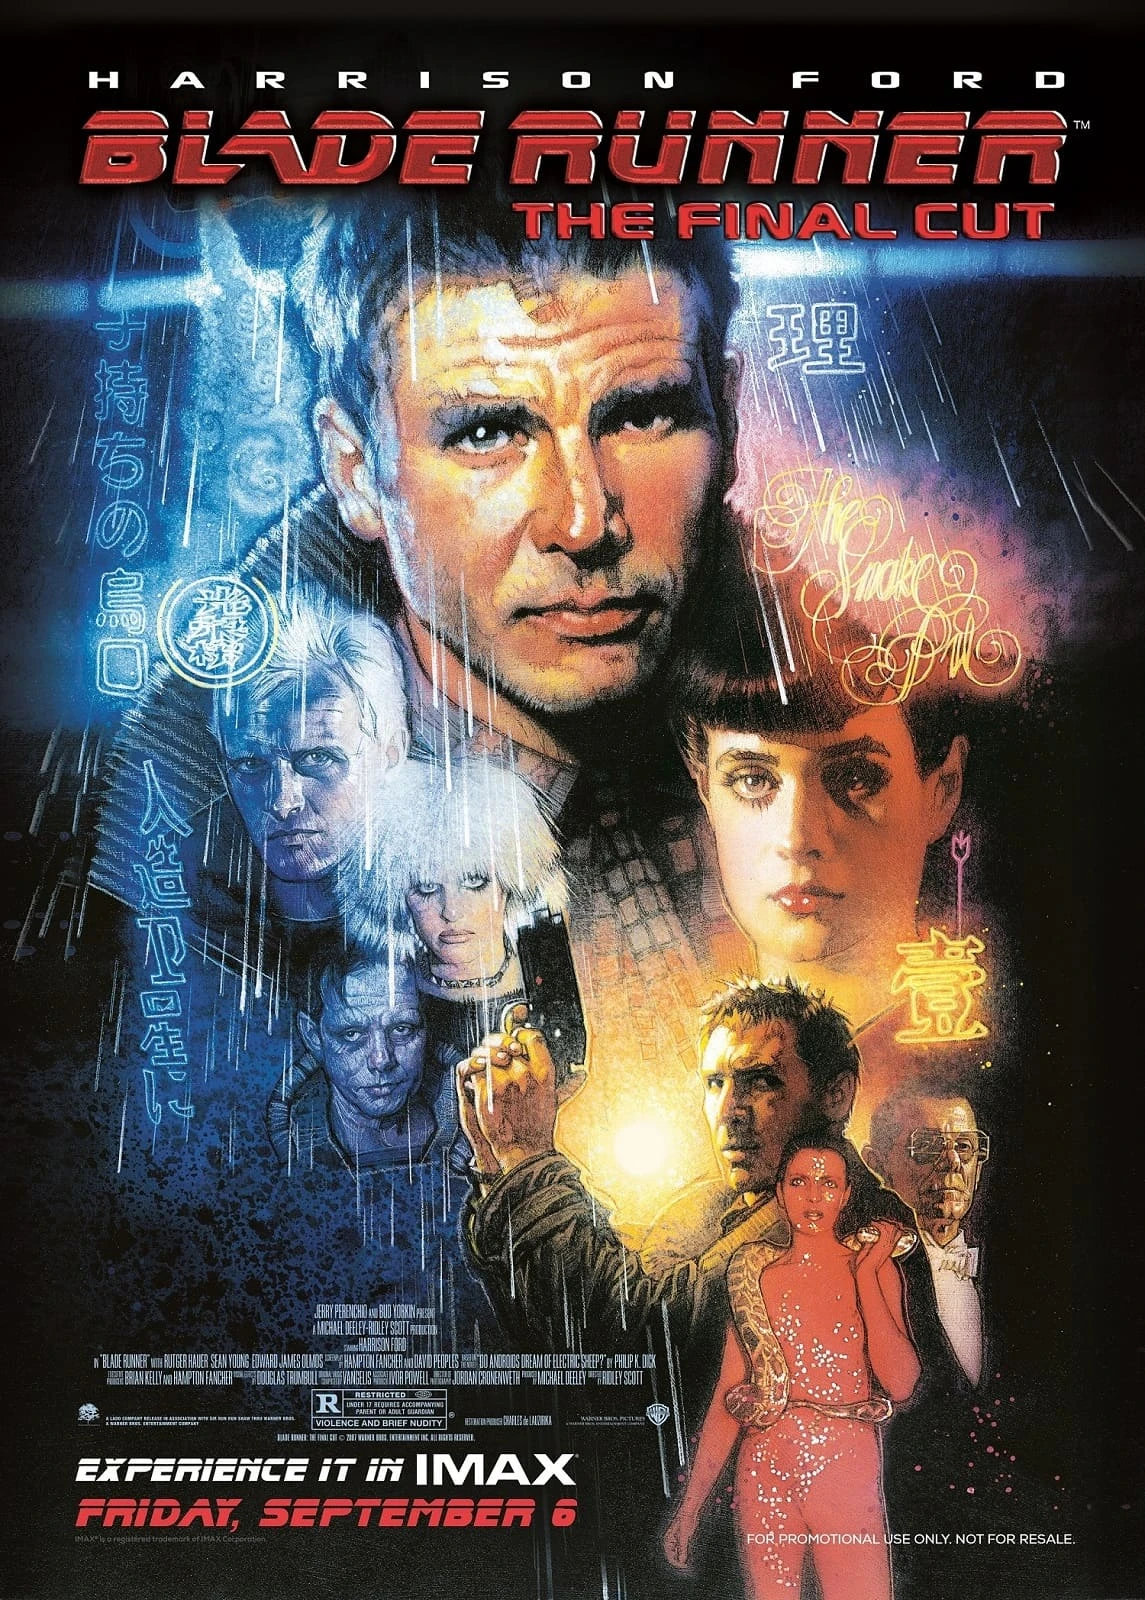 Blade Runner: The Final Cut © 2007 Warner Bros. Entertainment Inc. All rights reserved.